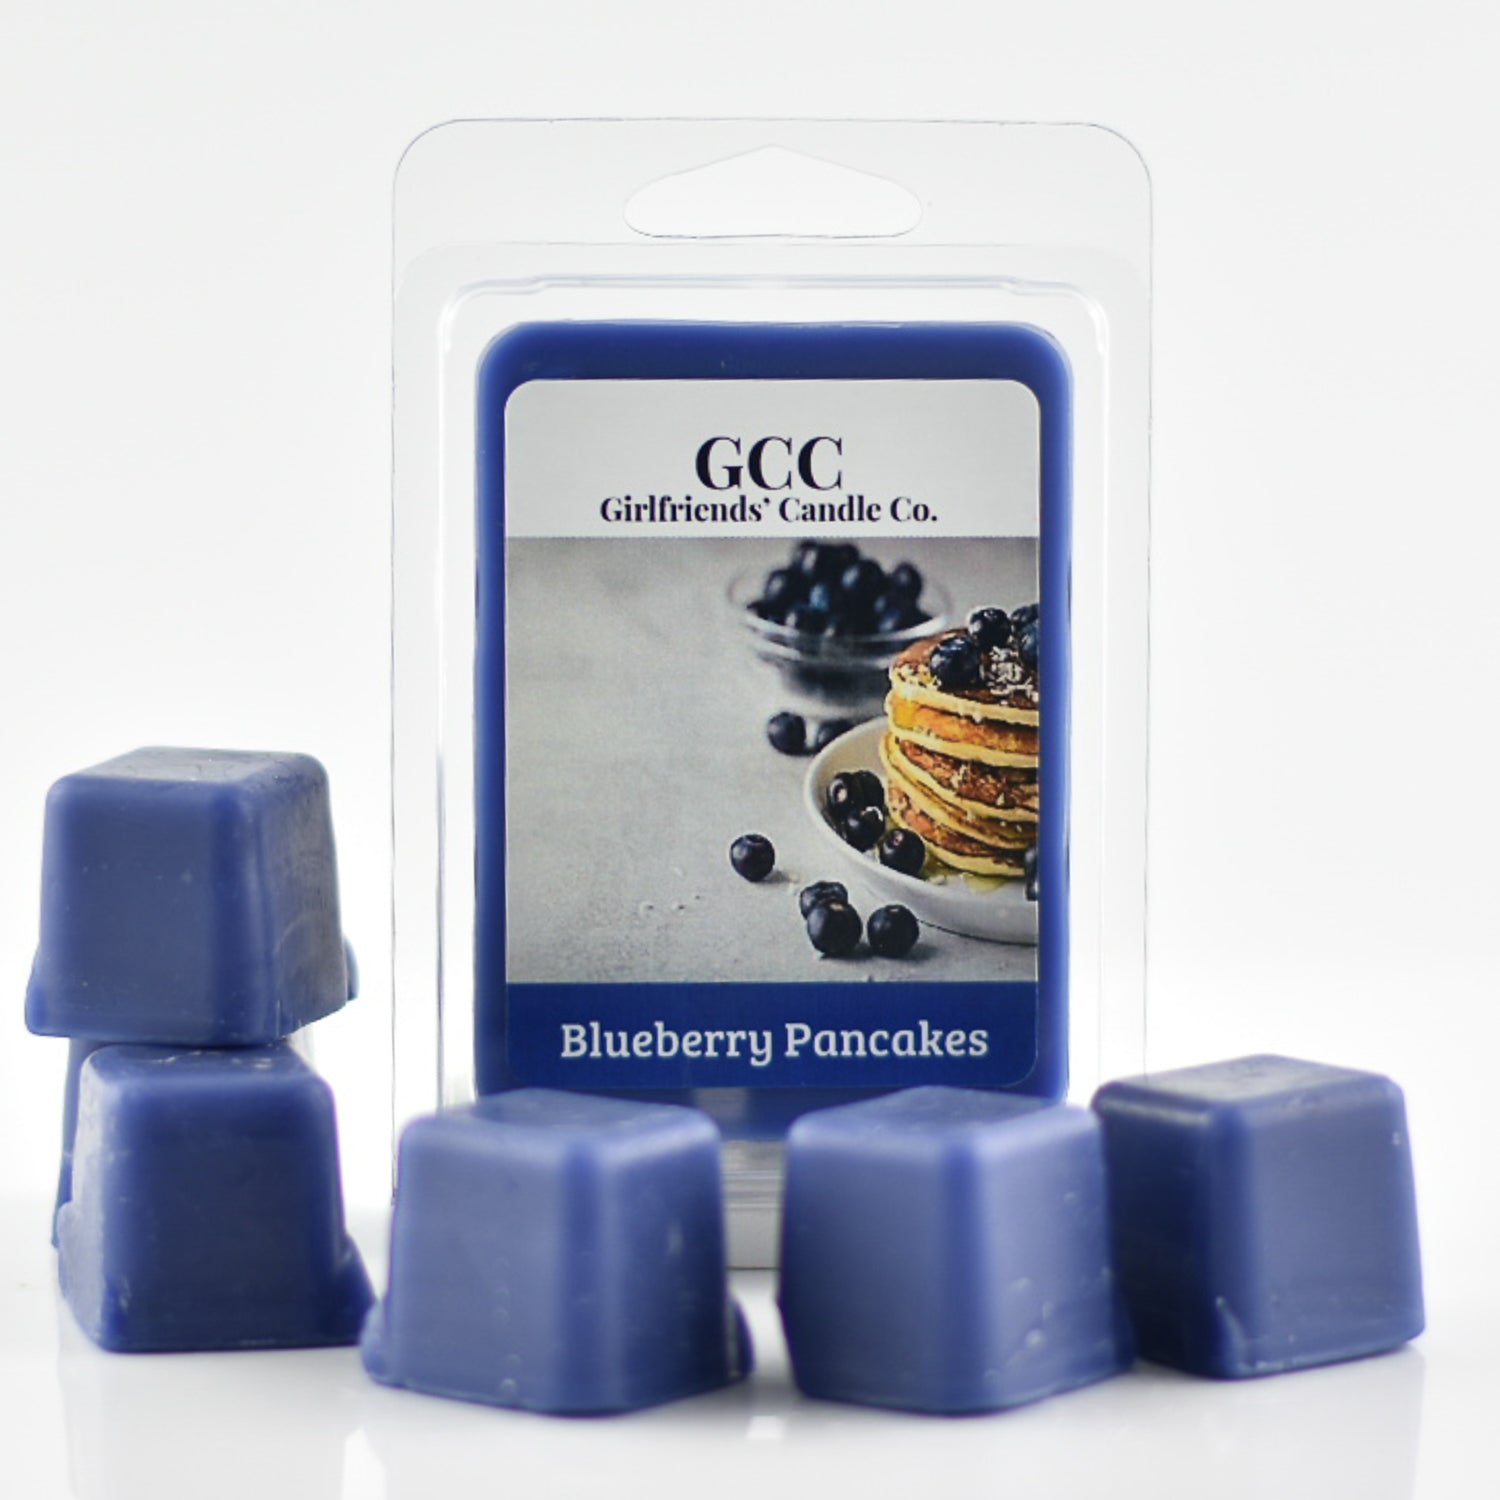 Blueberry Pancakes Scented Wax Melt